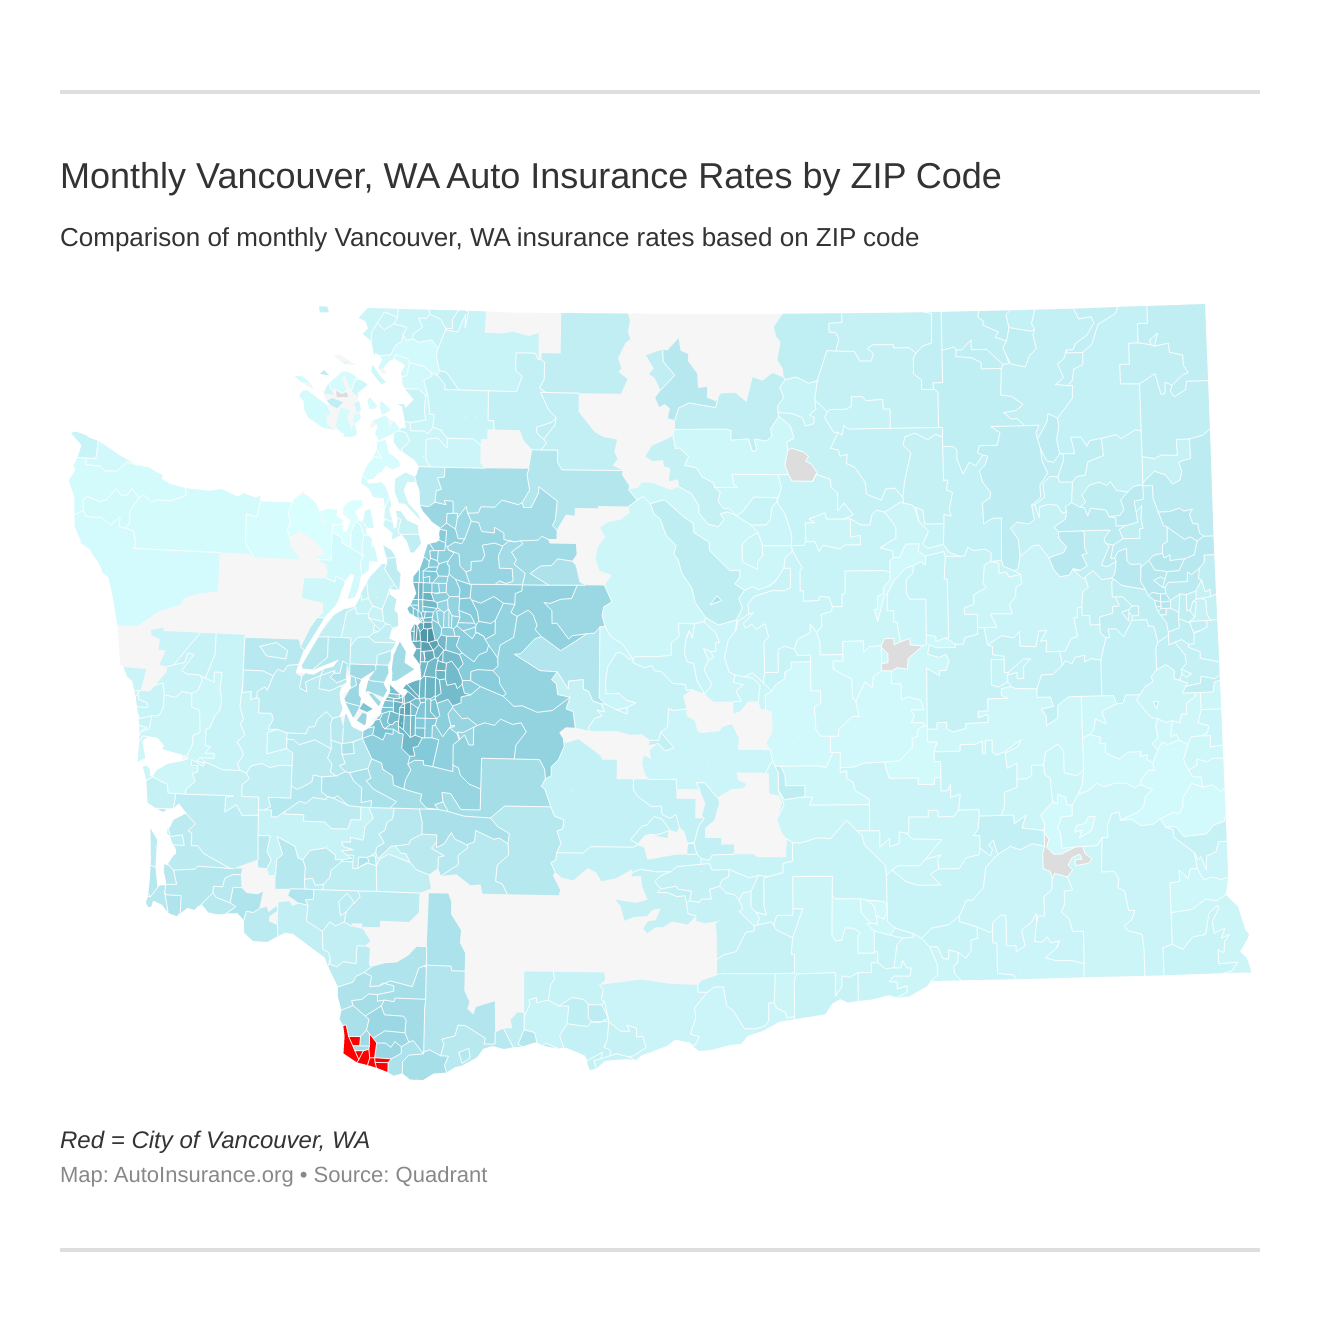 Monthly Vancouver, WA Auto Insurance Rates by ZIP Code